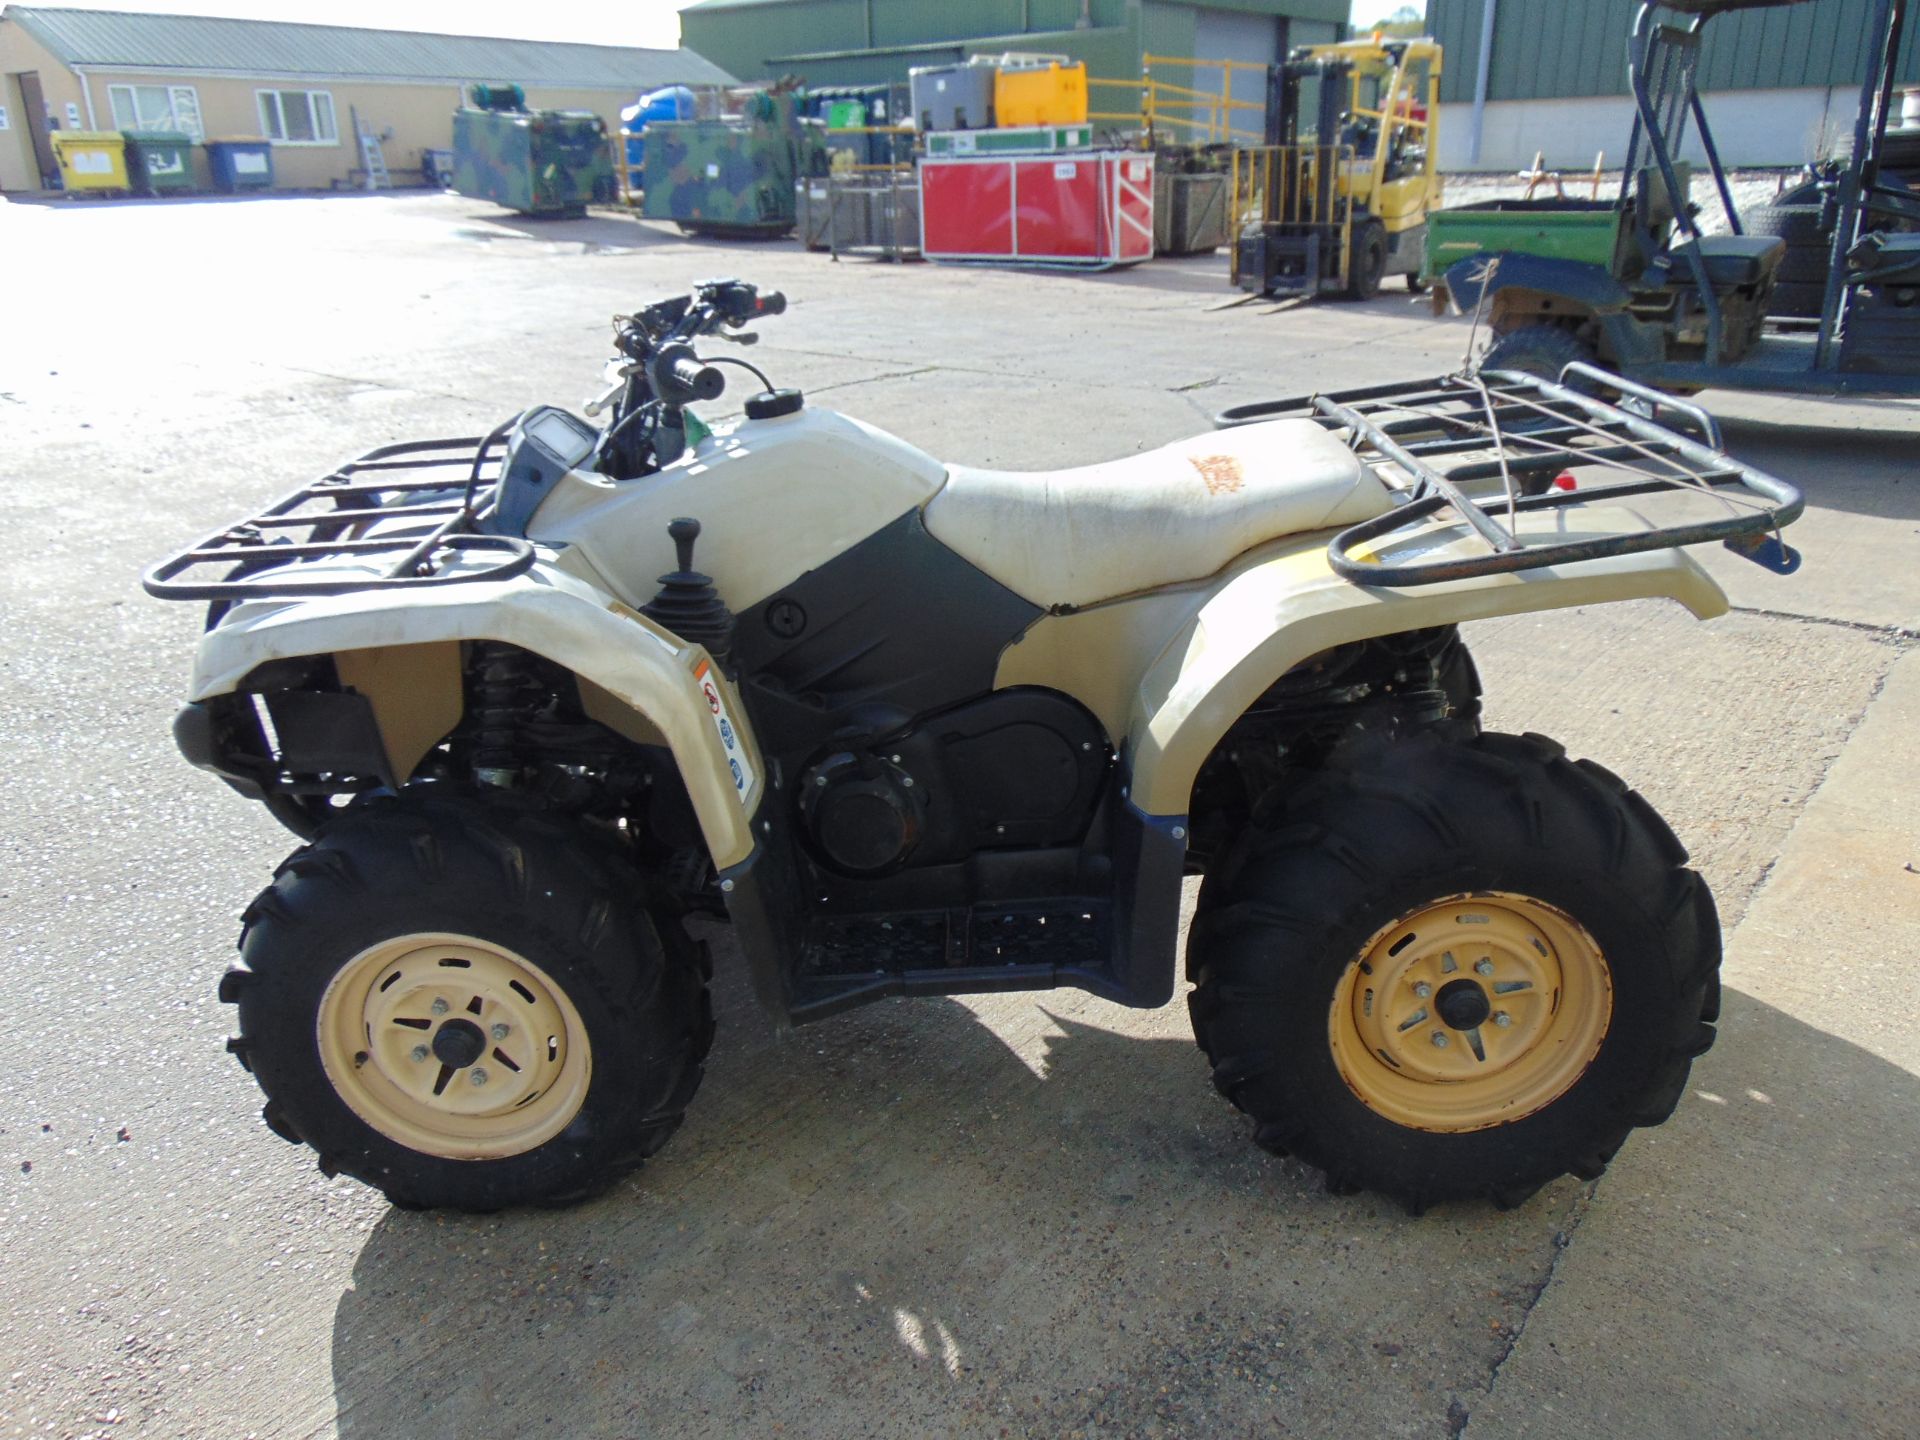 Recent Release Military Specification Yamaha Grizzly 450 4 x 4 ATV Quad Bike - Image 4 of 15